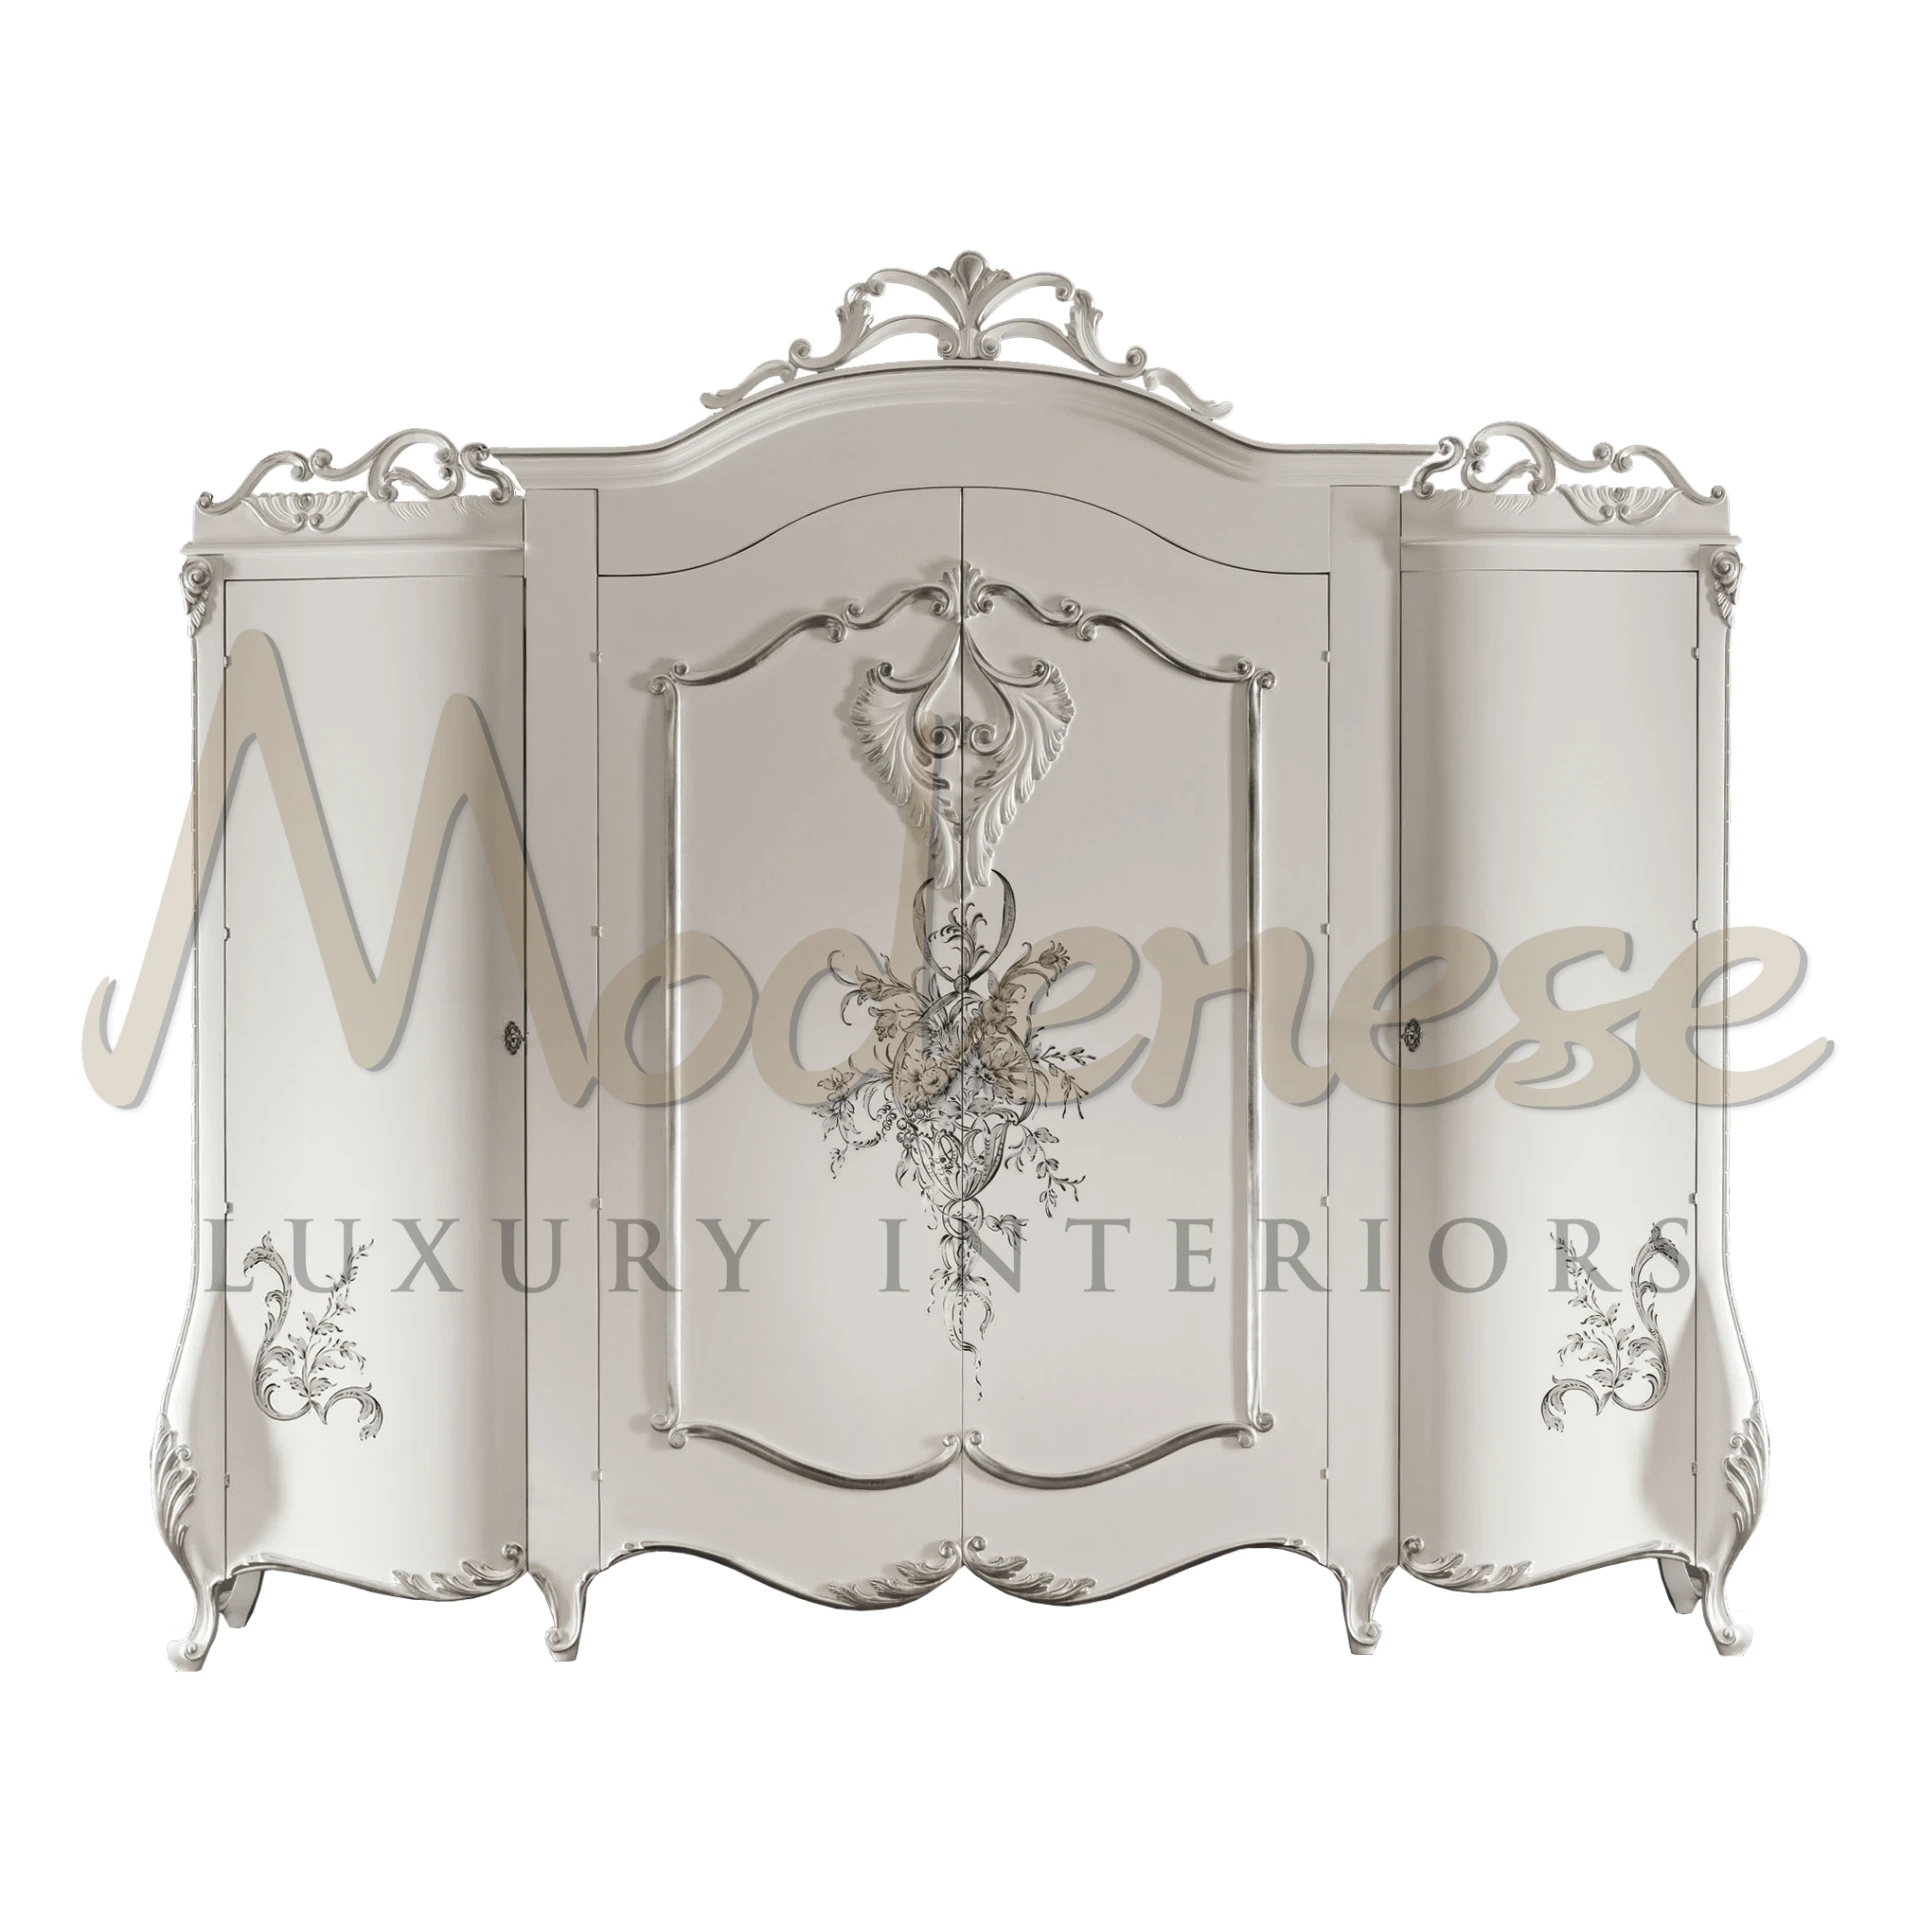 Ornate silver wardrobe with central floral carving and curved lines.                                                                                  